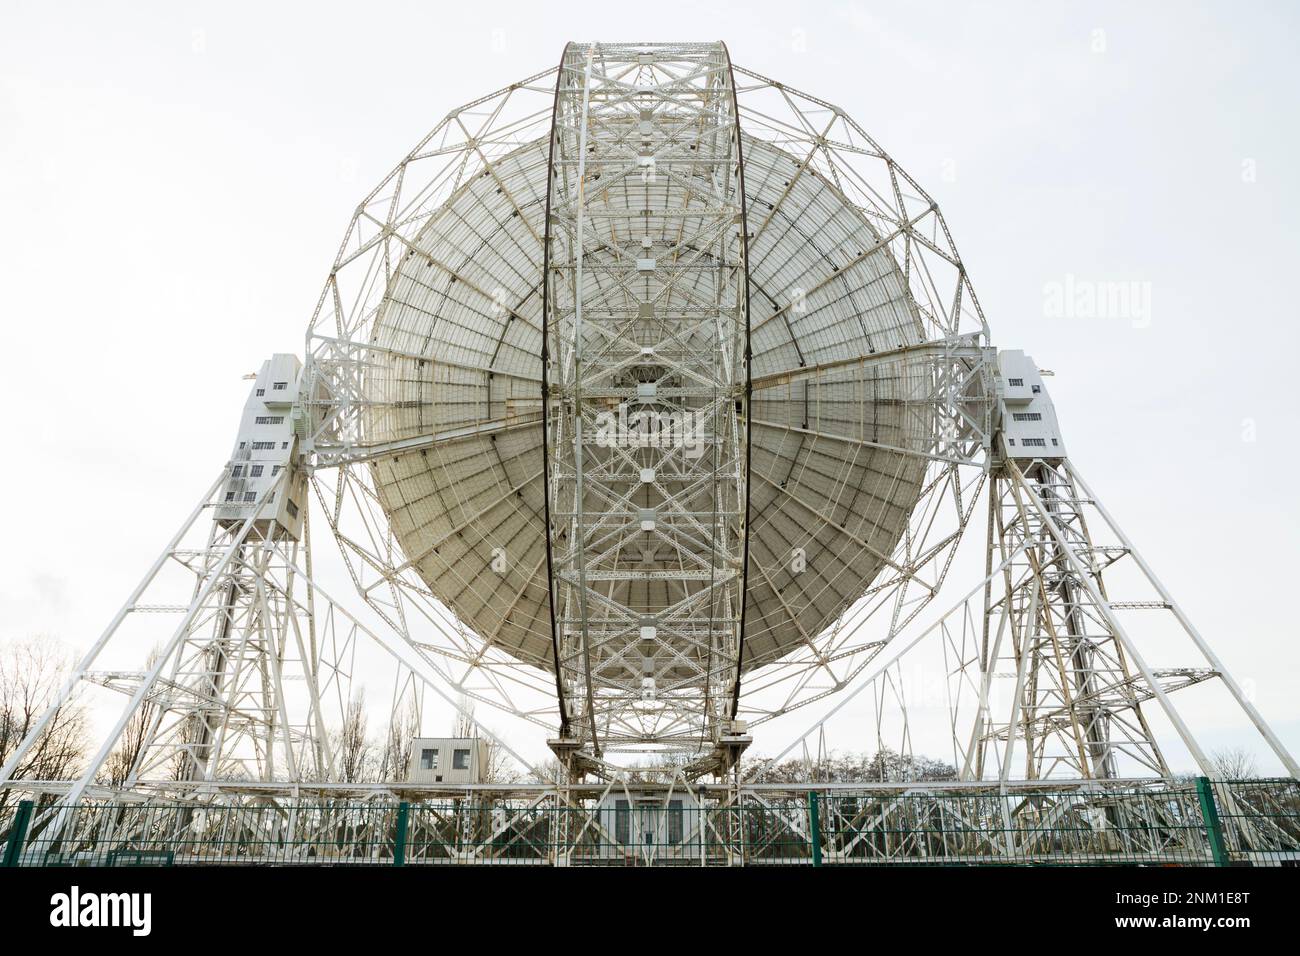 The giant Lovell radio telescope at Jodrell Bank site, Cheshire, UK. The frame supporting the dish is seen clearly from behind / reverse / side. (133) Stock Photo